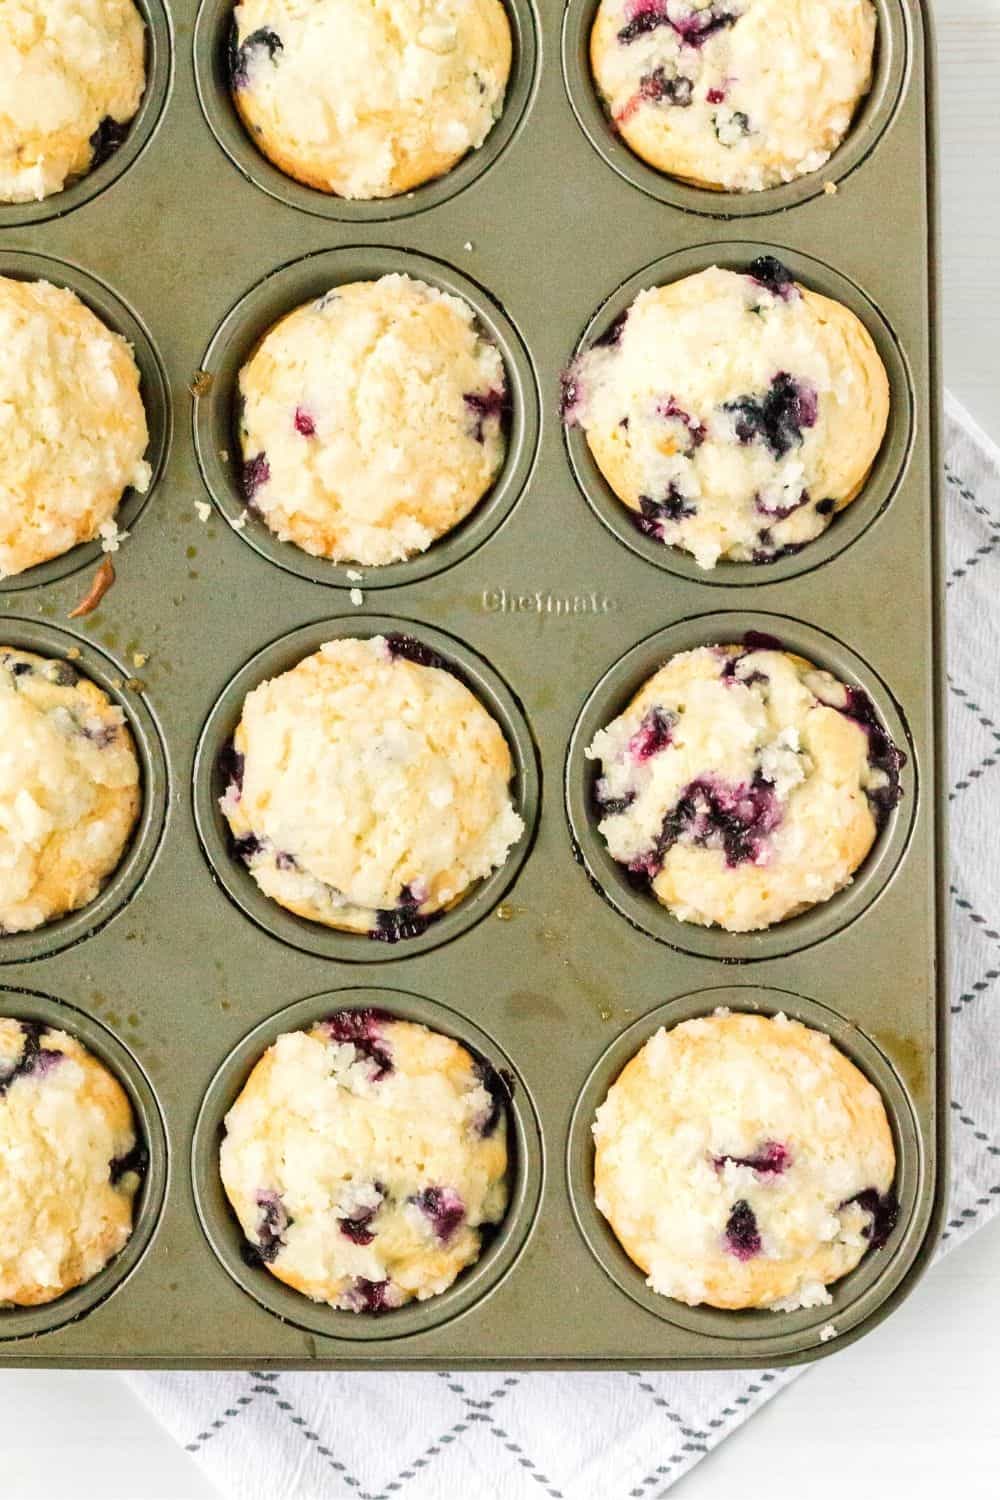 freshly baked blueberry bisquick streusel muffins in a muffin tin